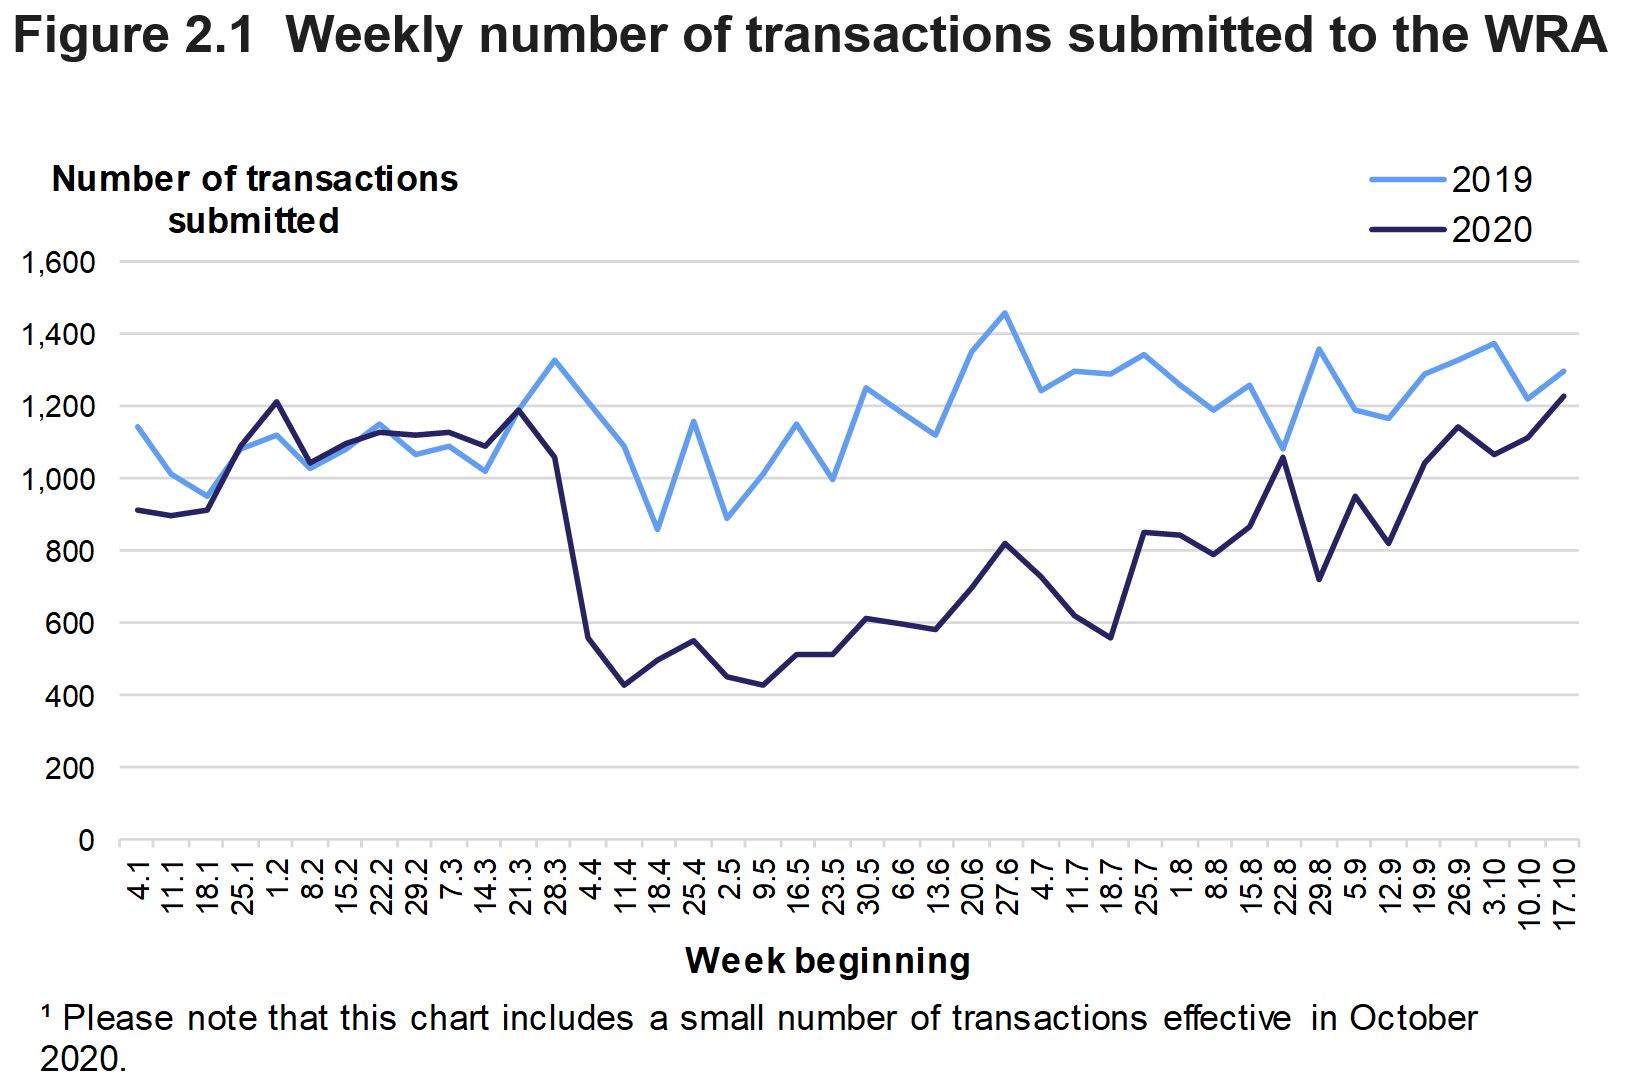 Figure 2.1 shows the number of residential and non-residential transactions submitted to the WRA each week from January to October, in 2019 and 2020. Please note that this chart includes a small number of transactions effective in October 2020.